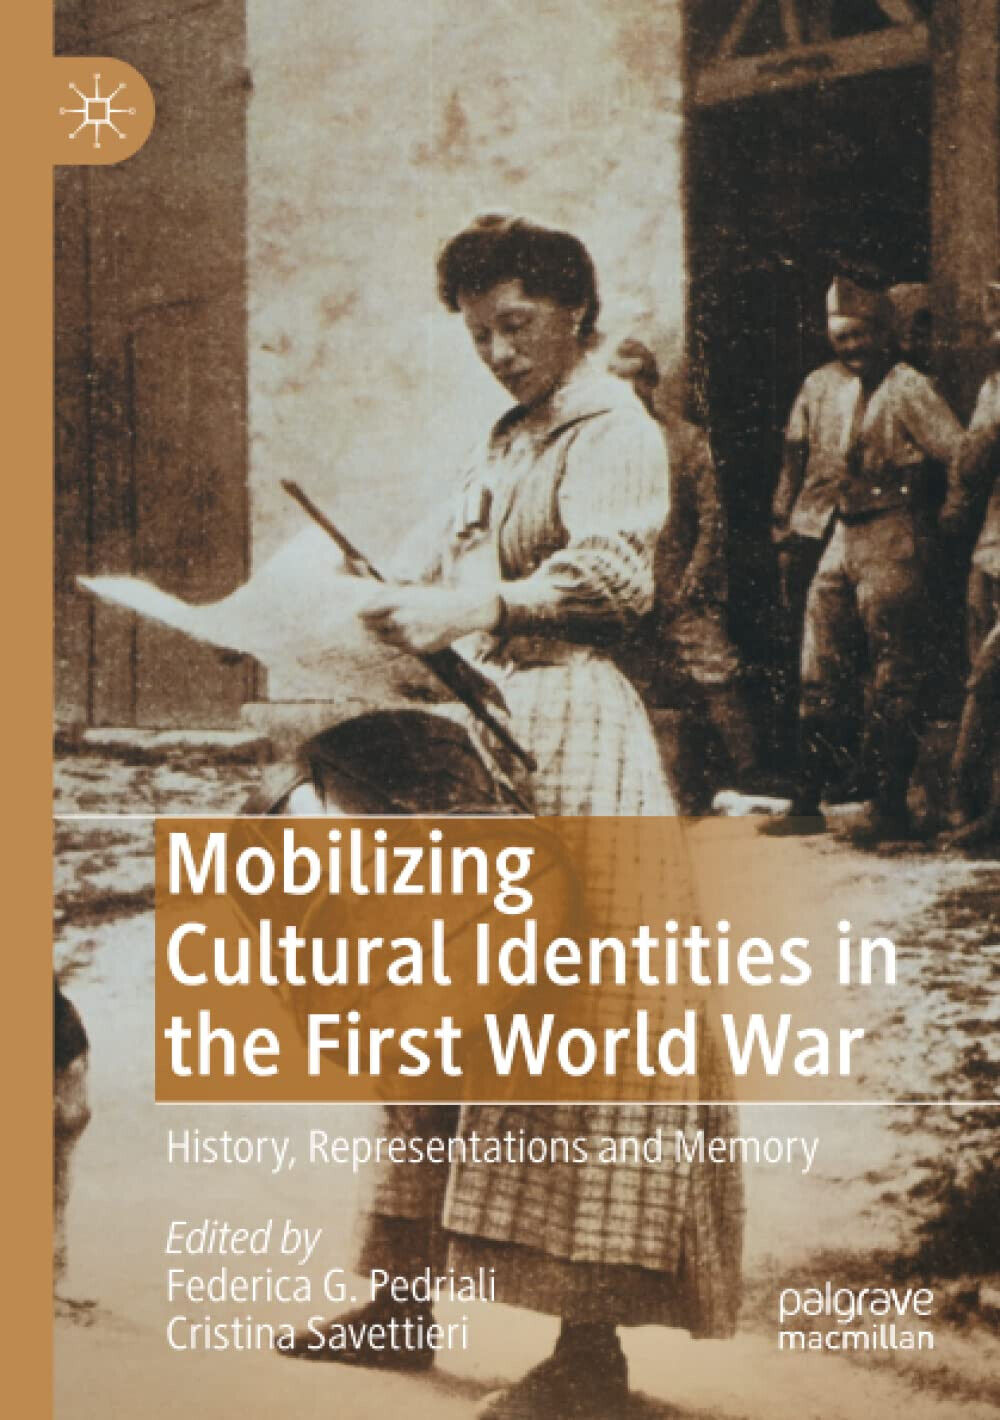 Mobilizing Cultural Identities In The First World War -Federica G. Pedriali-2021